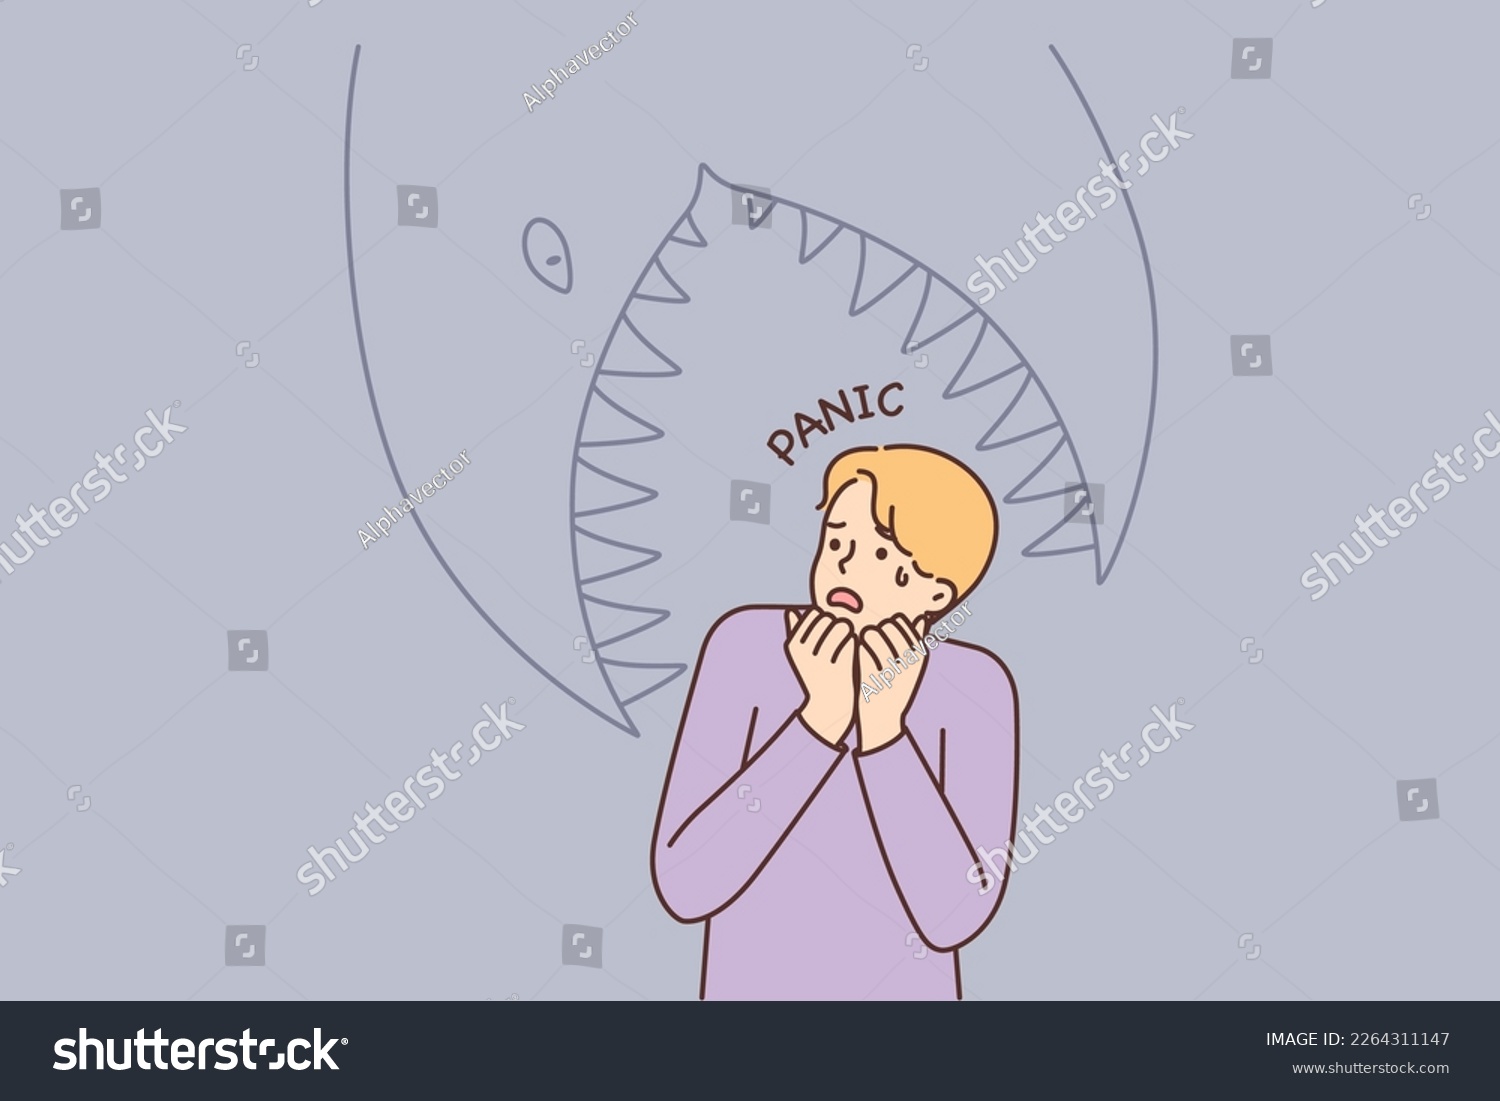 SVG of Frightened man having panic attack imagining giant fish trying to eat him. Cowardly guy panic and gets scared after watching horror movies or reading scary stories in books svg